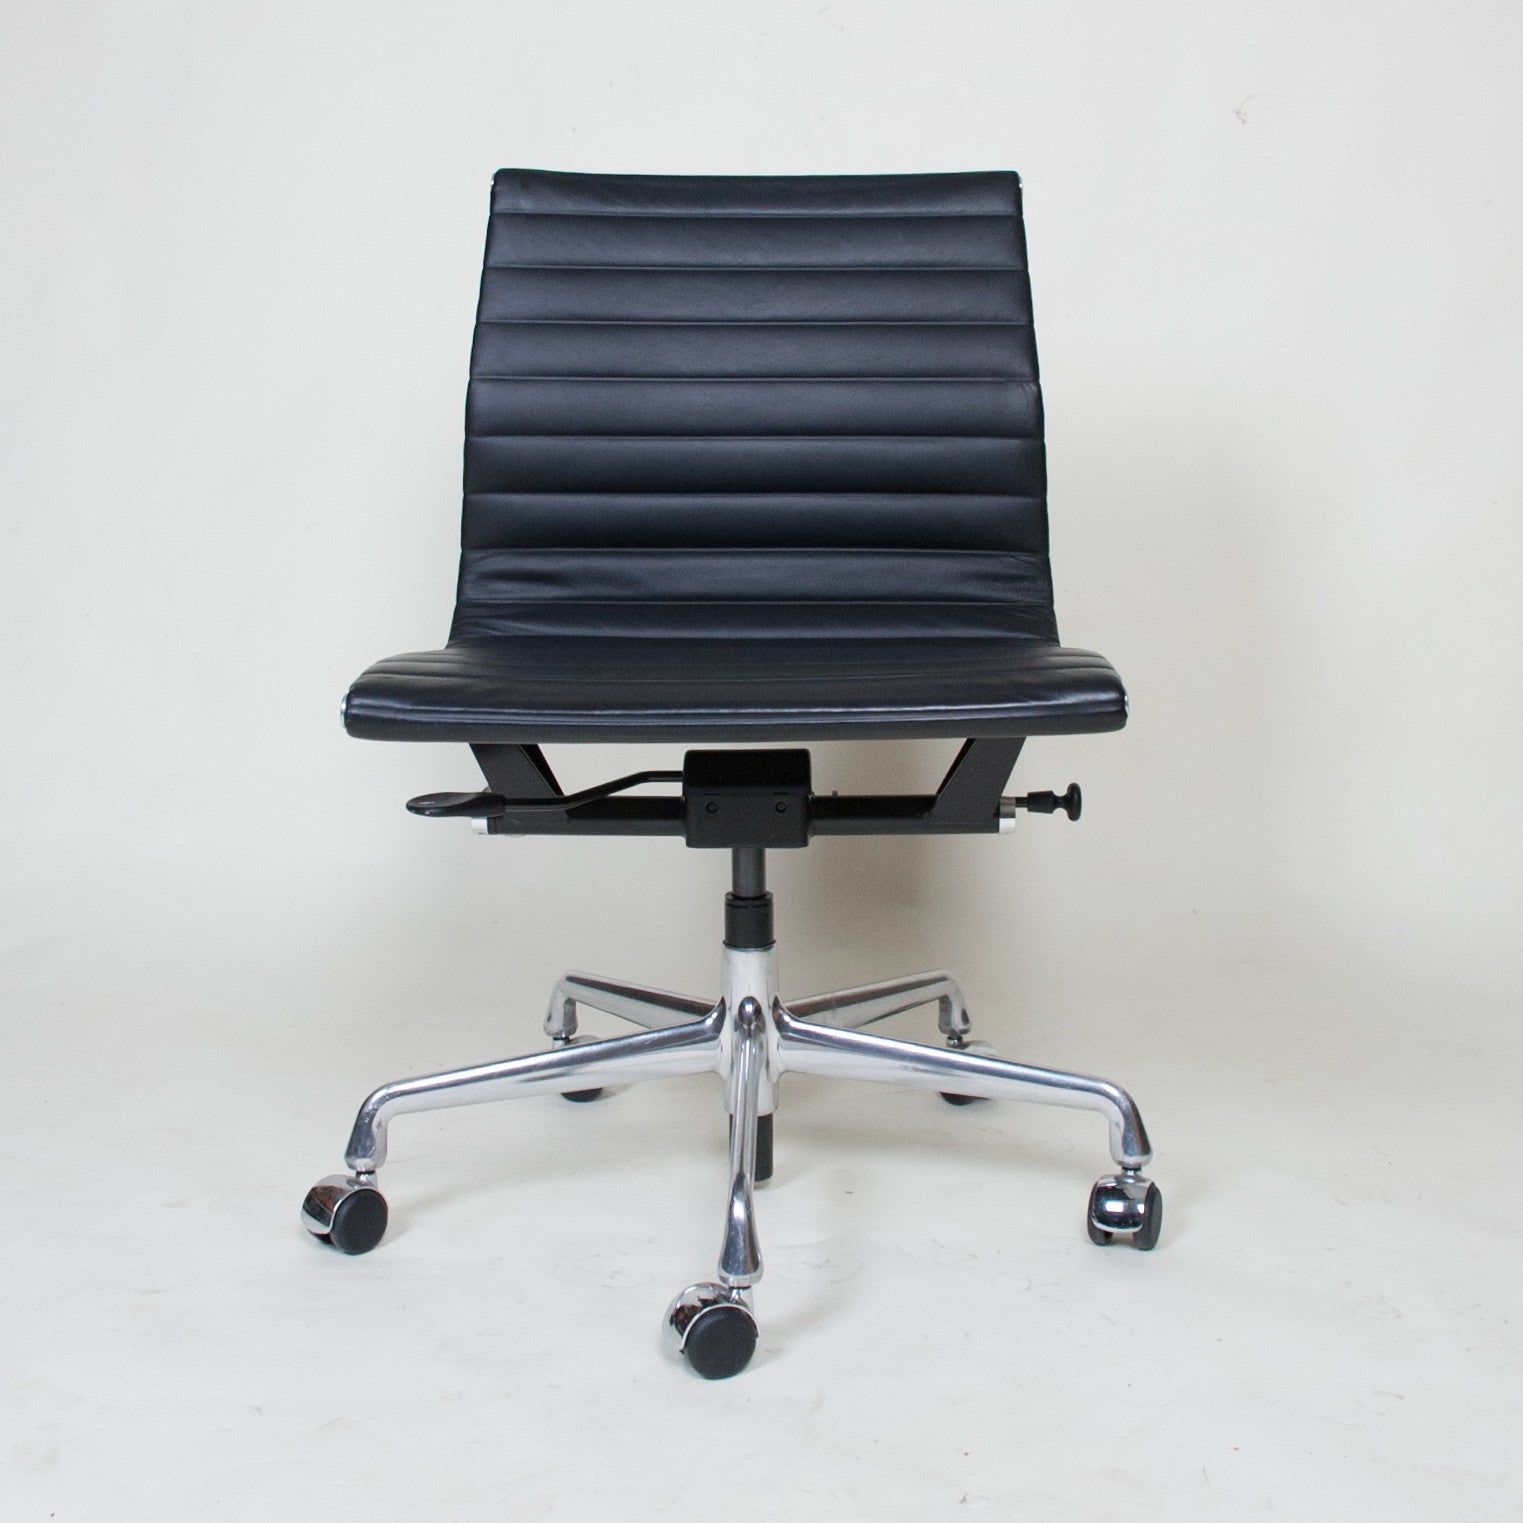 SOLD Eames Herman Miller Low Back Aluminum Group Chairs 4x